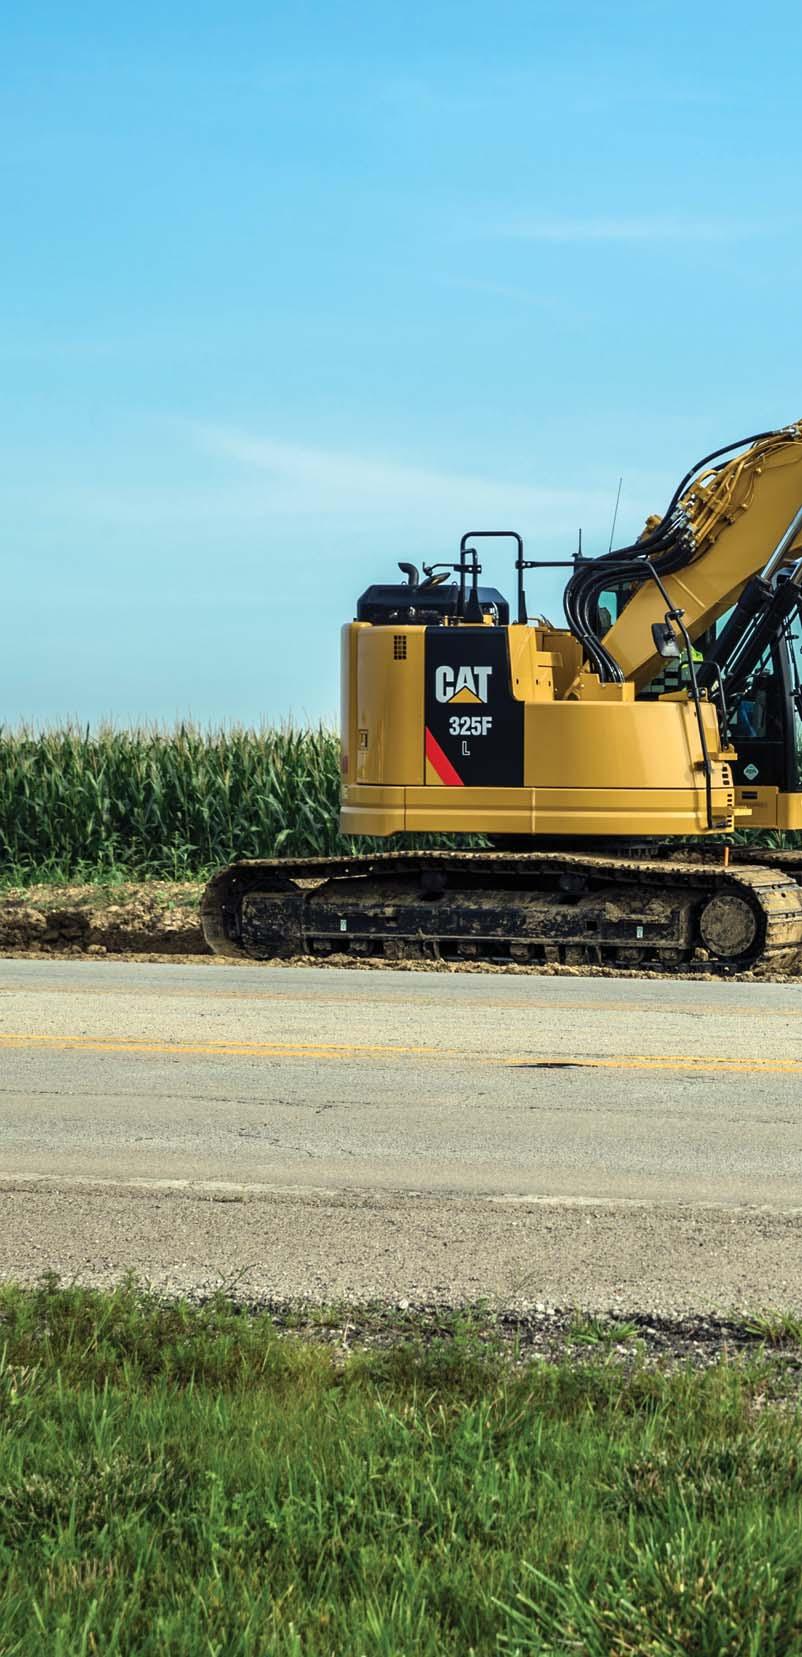 If your work takes you in to tight spaces and you need the absolute best performance at the lowest cost per unit of work that you can possibly get from a 25-ton excavator, take along a Cat 325F L.